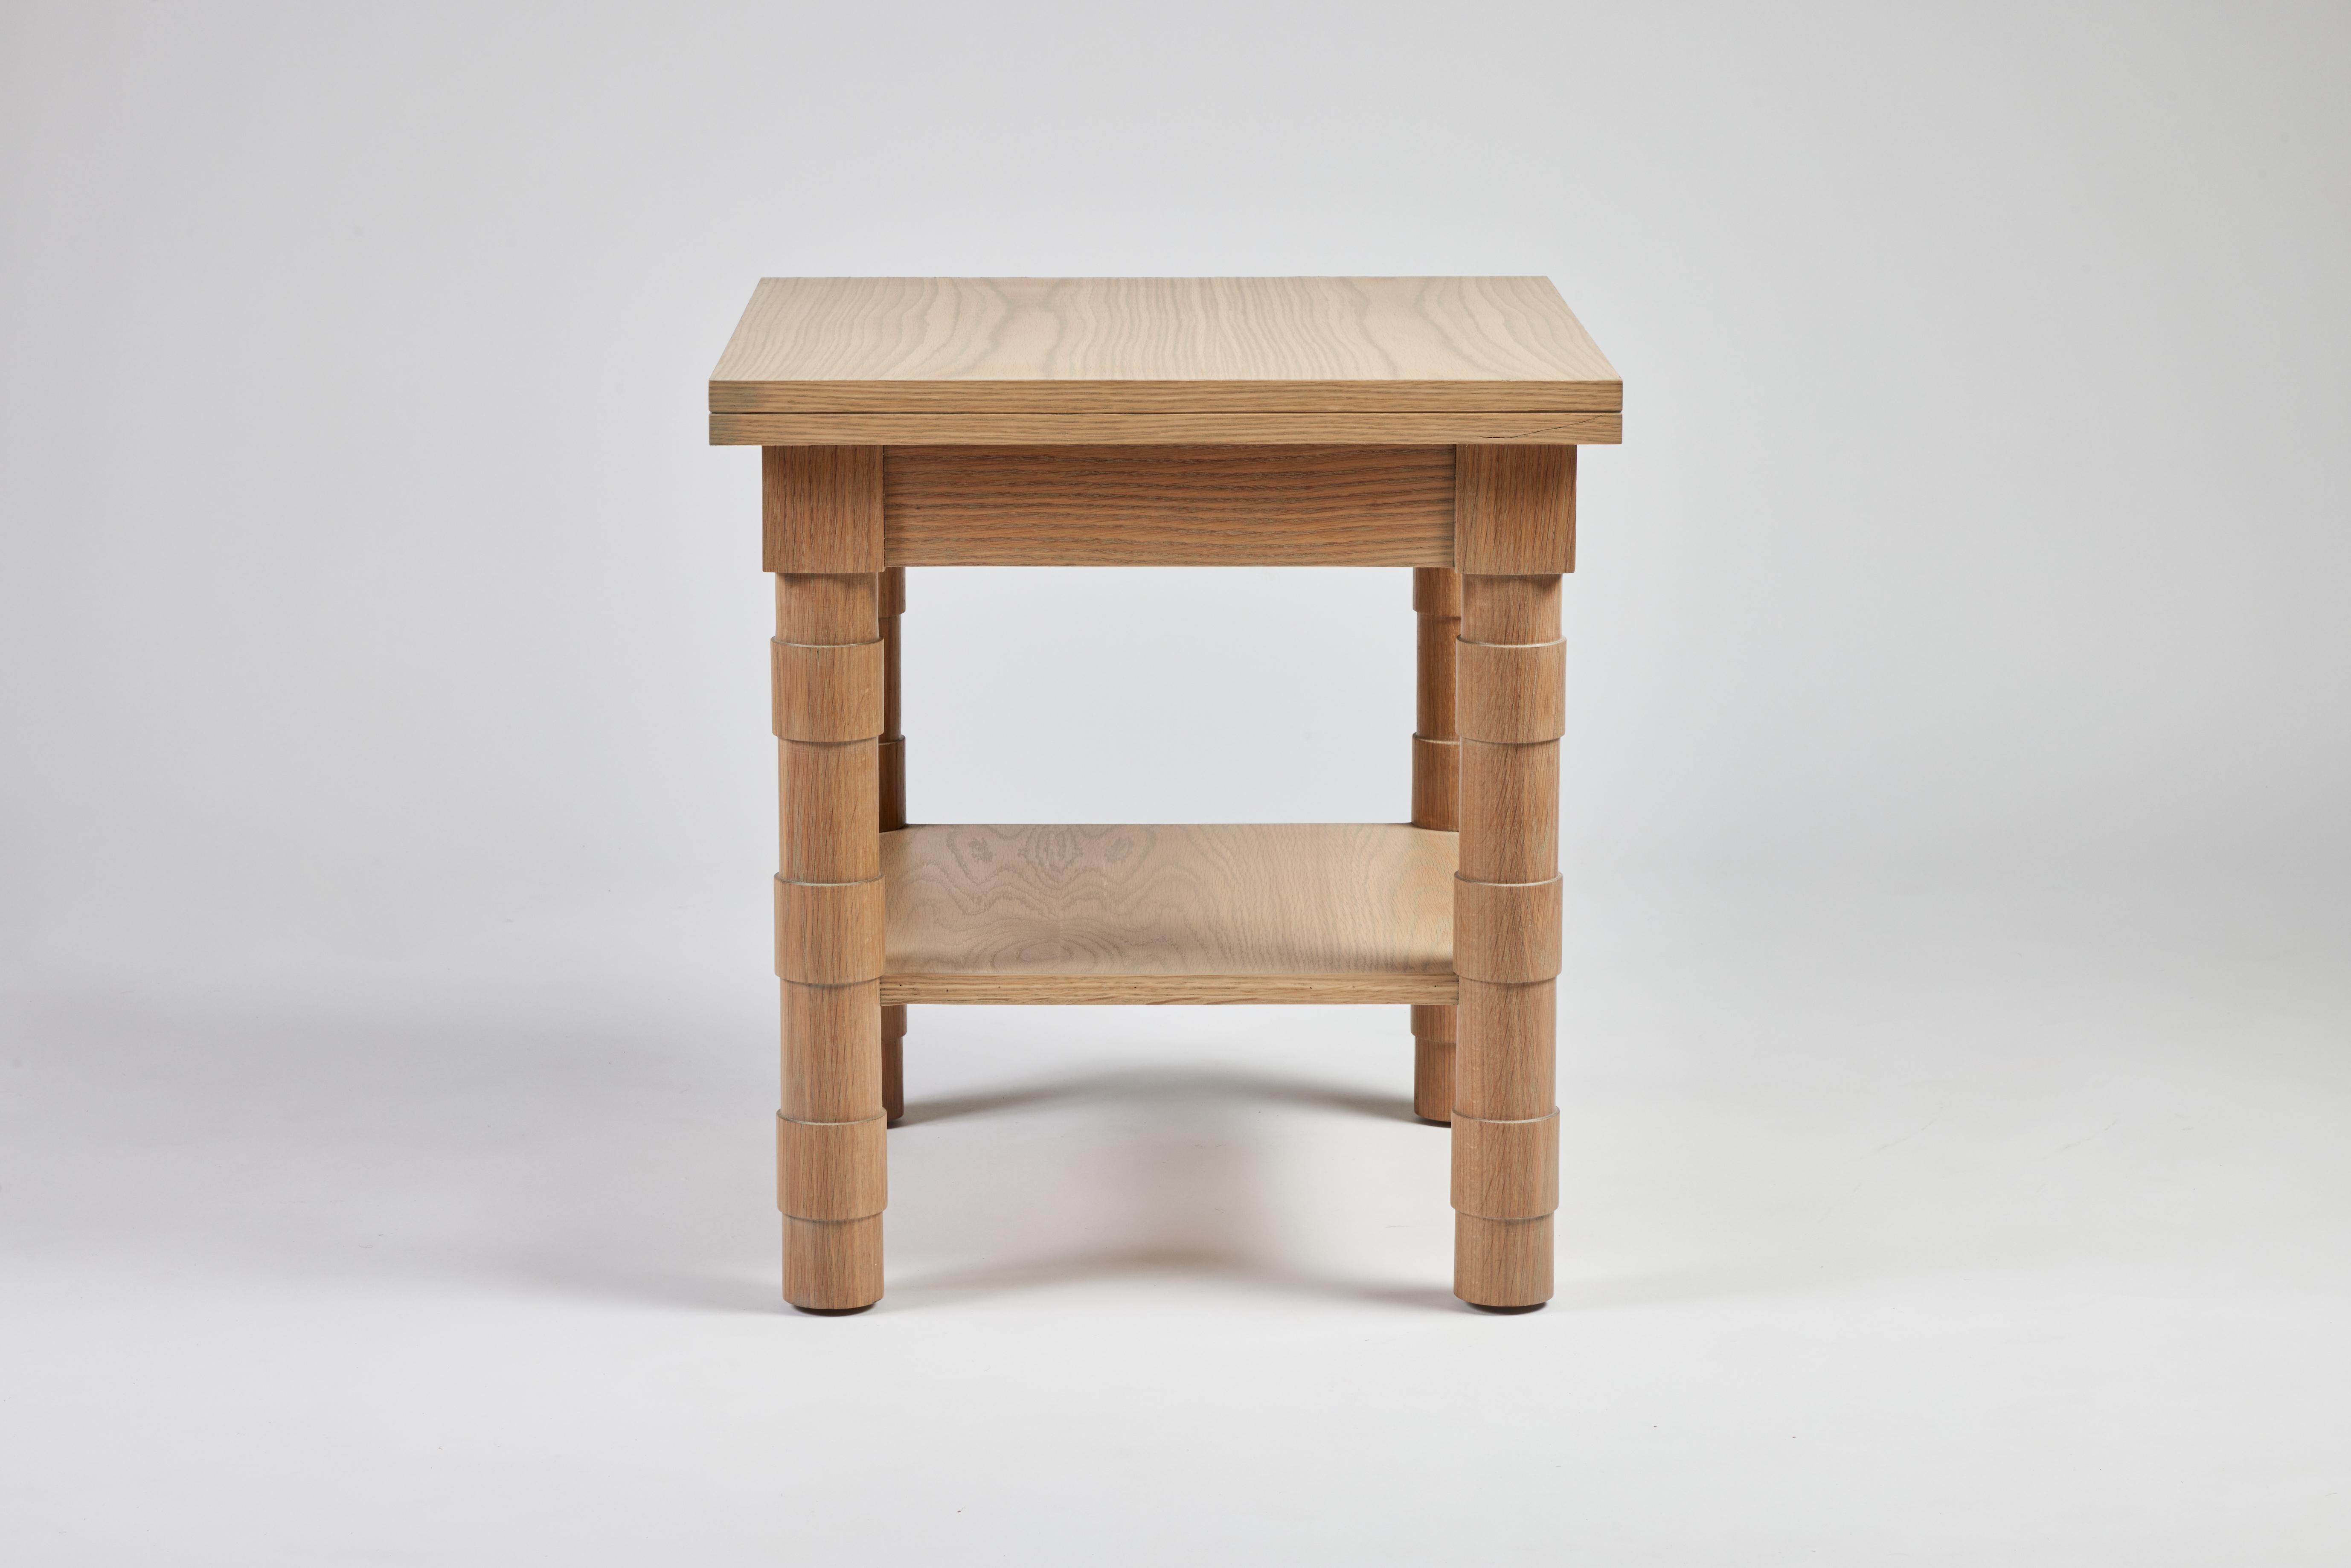 American Transitional Turned Leg Jenks Side Table in Oak by Martin and Brockett For Sale